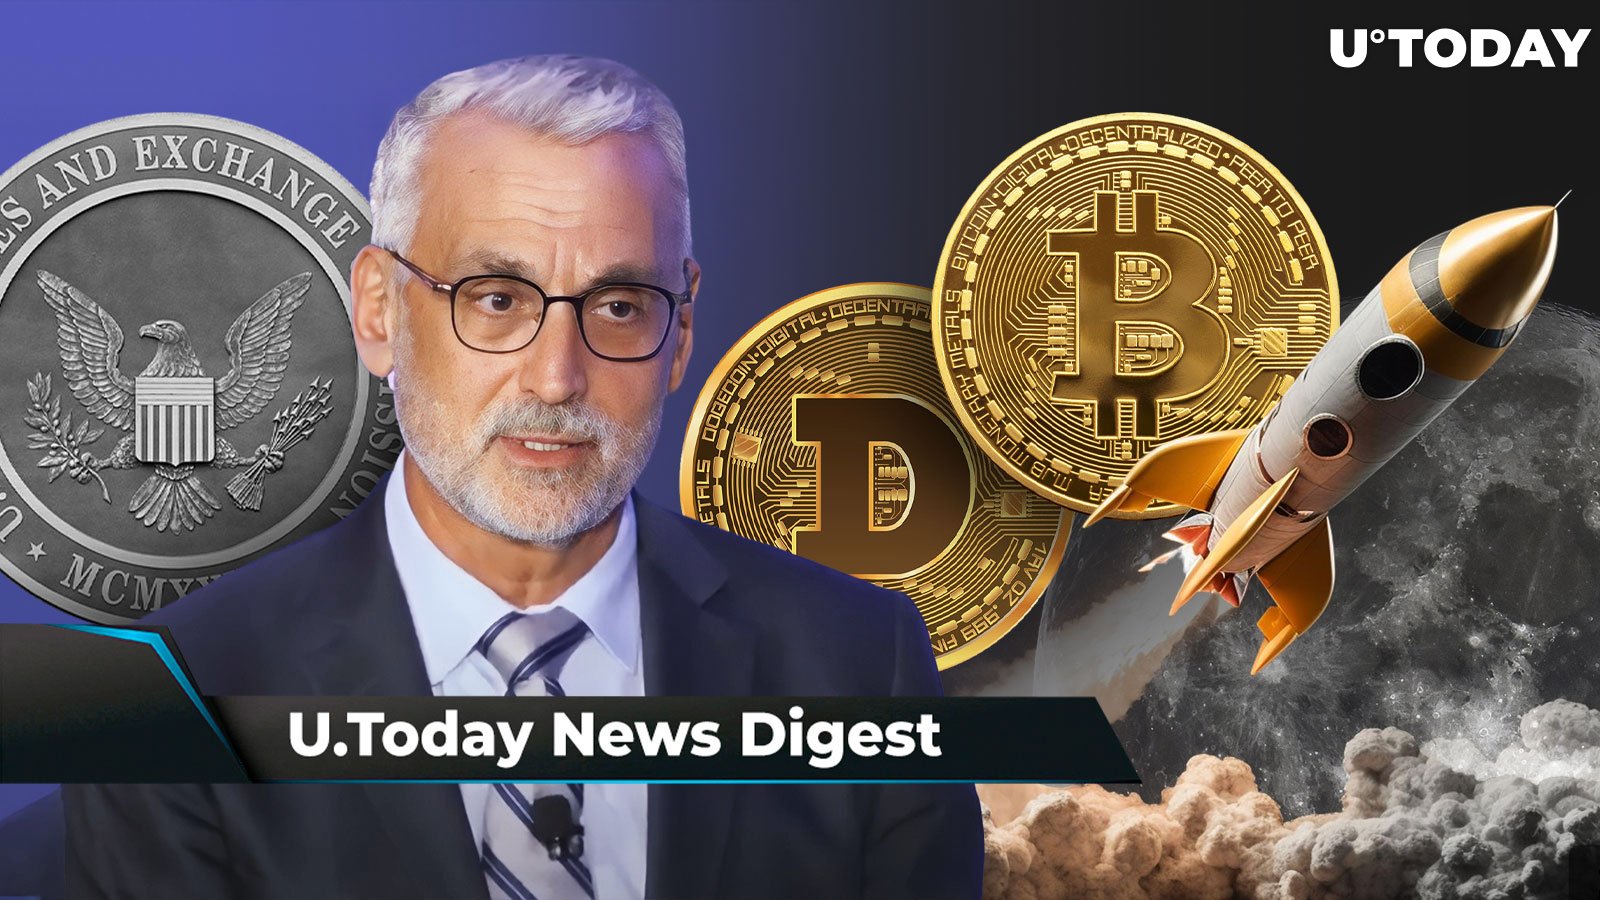 Ripple's Stuart Alderoty Claims SEC Losing Legal Battles; Physical DOGE, BTC to Head to Actual Moon This Year, Shibarium Hits New Adoption Milestone: Crypto News Digest by U.Today